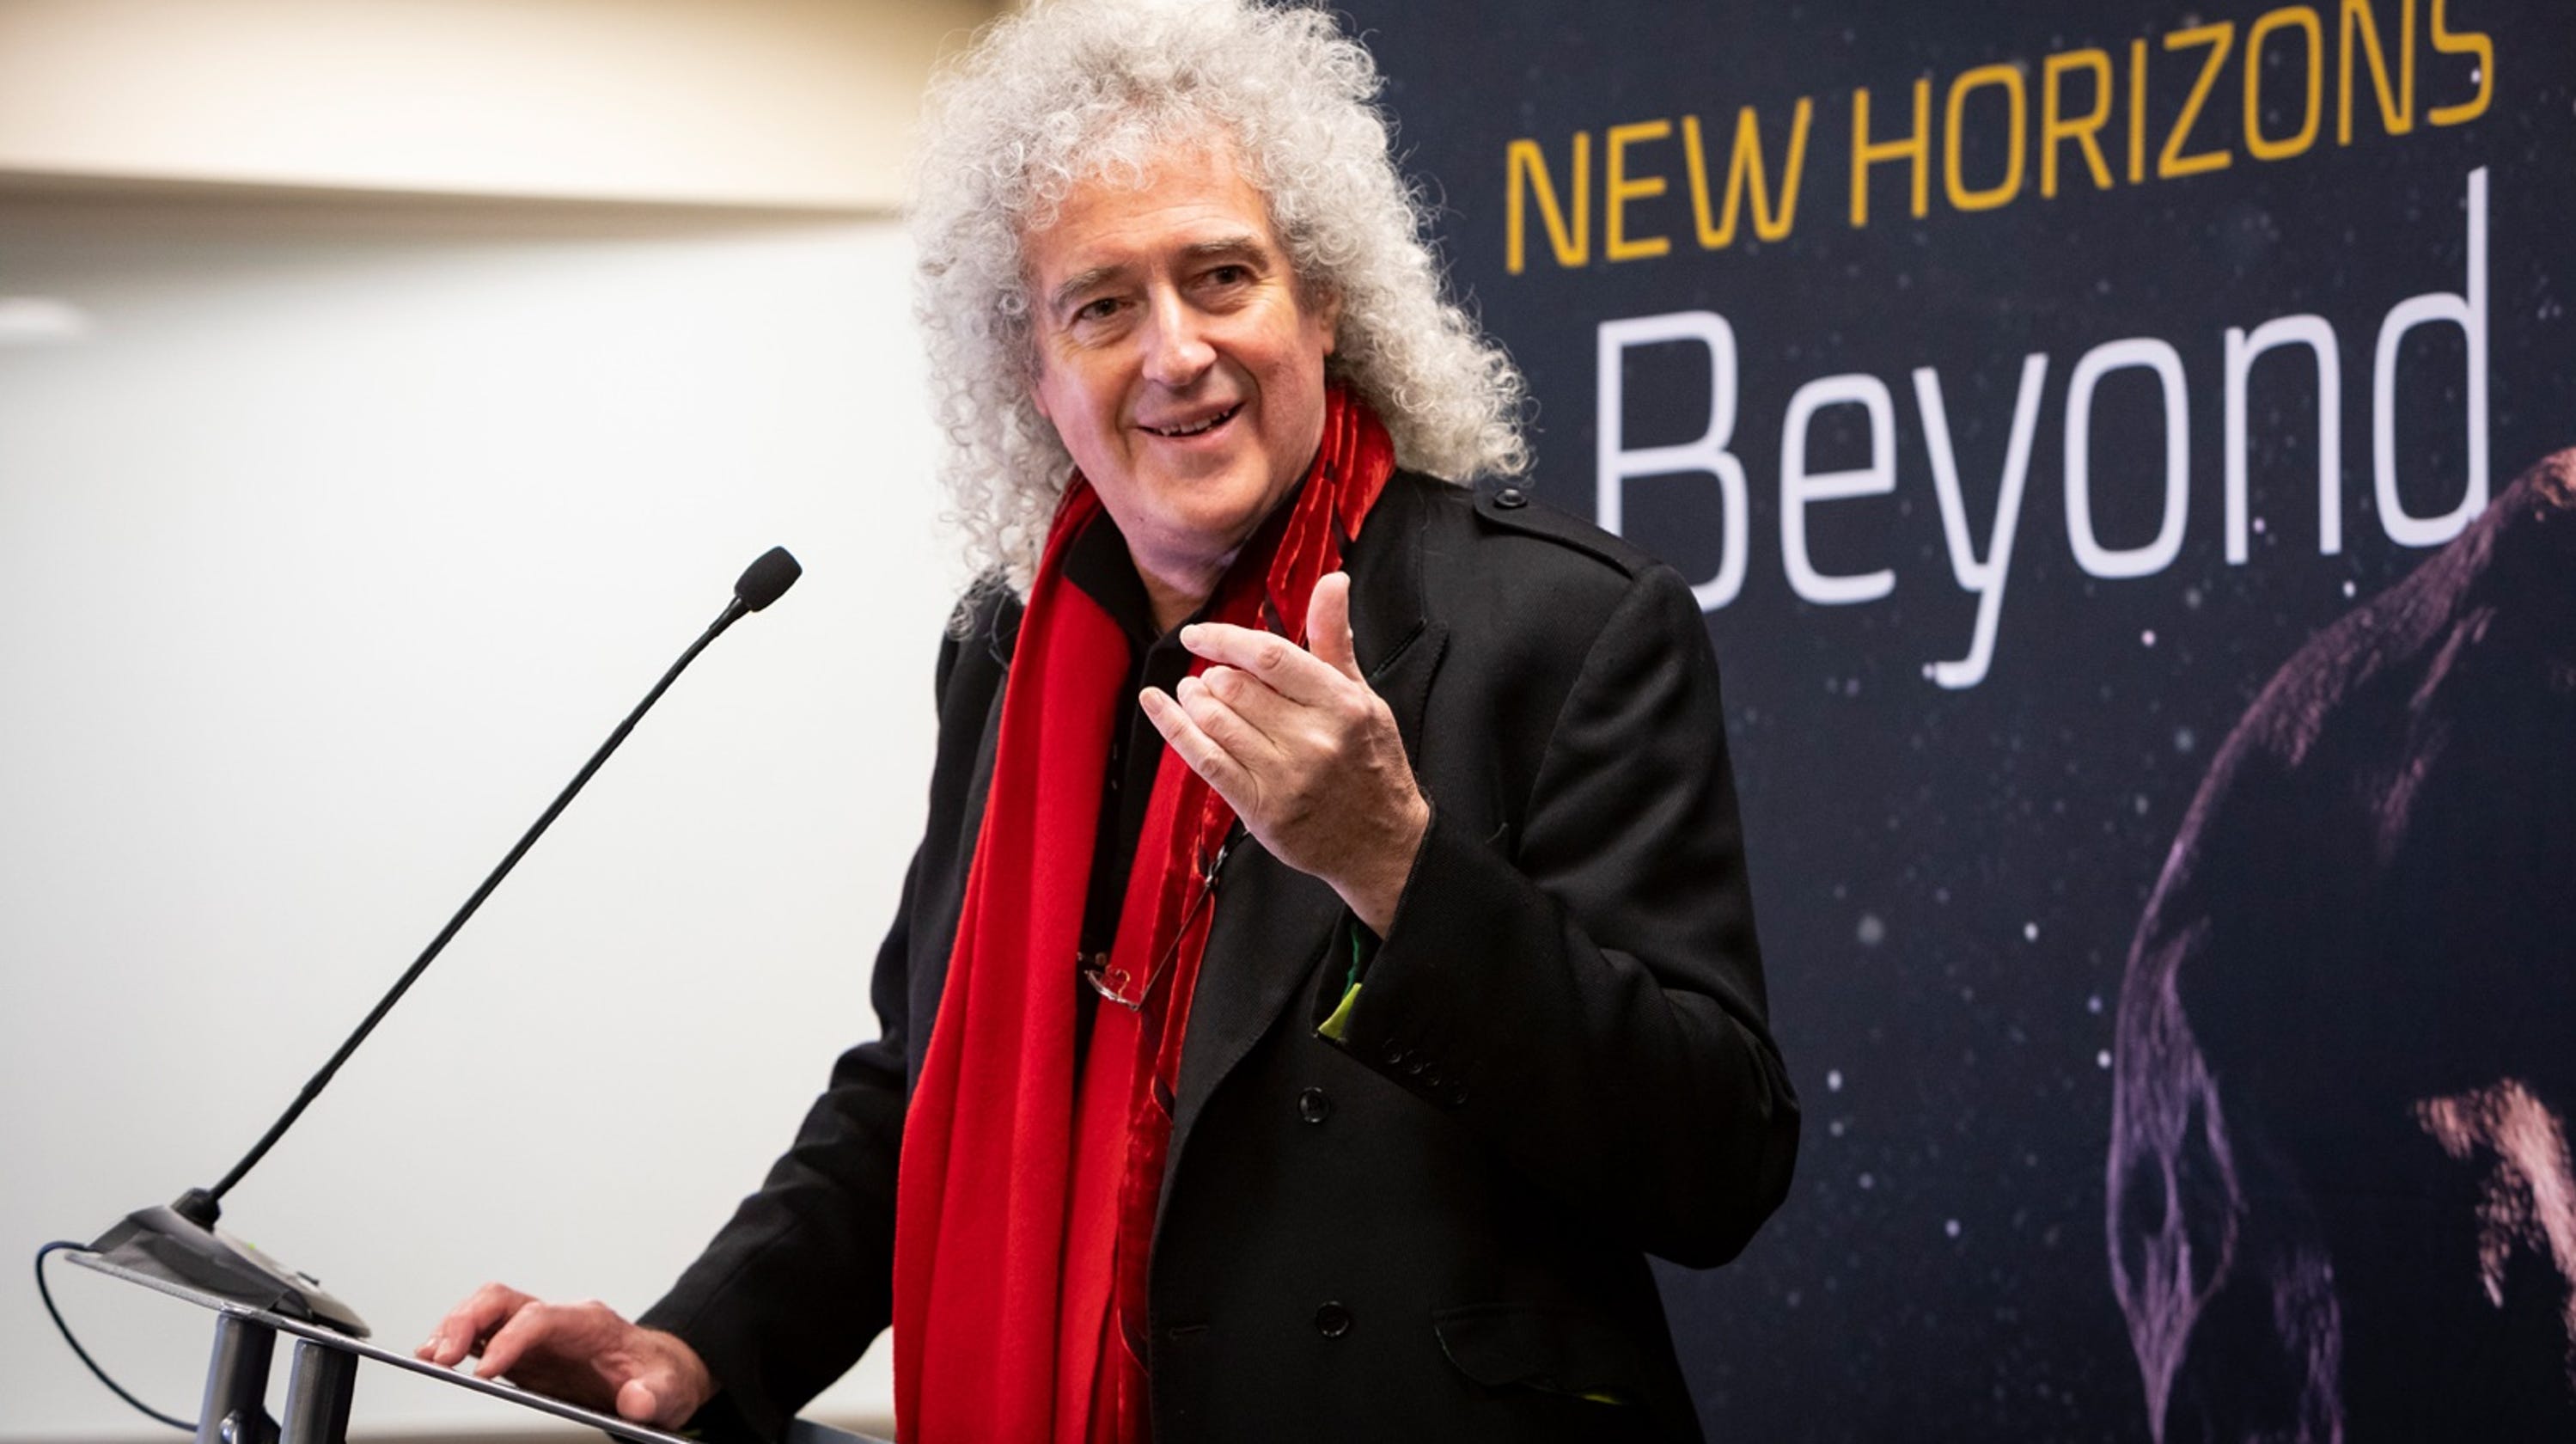 Queen guitarist Brian May releases new song dedicated to NASA mission2998 x 1680